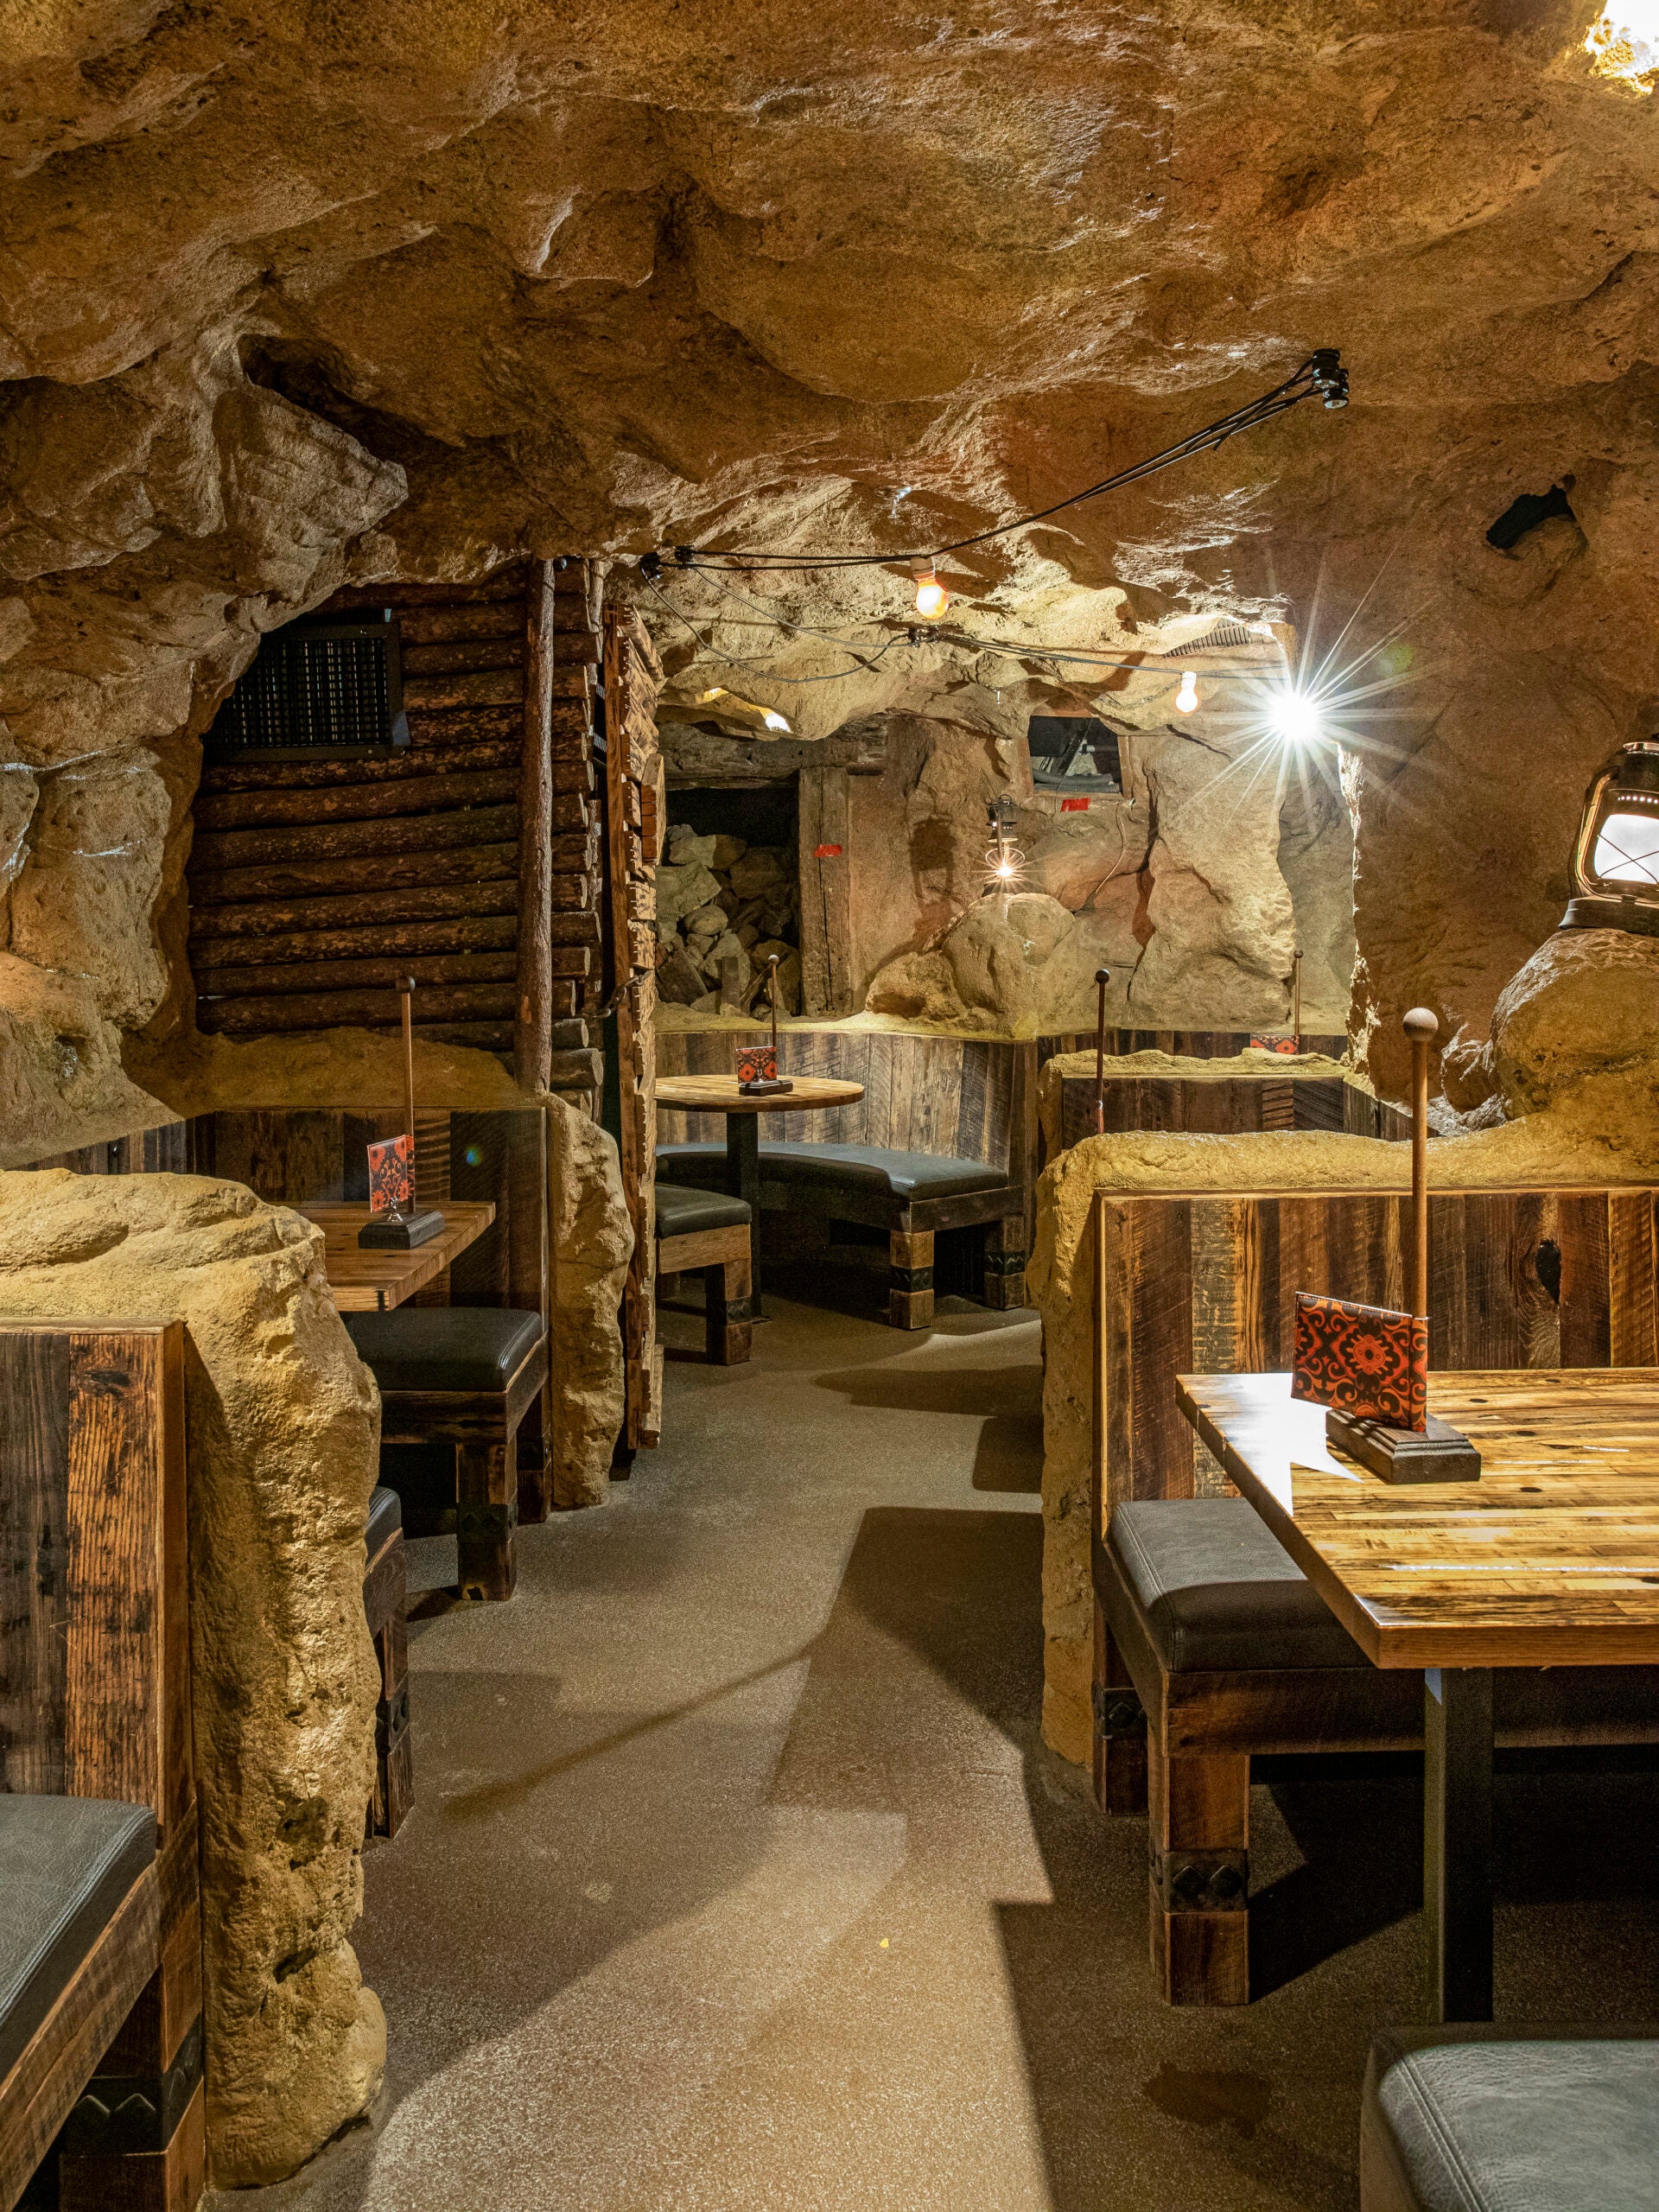 The silver mine room, one of many themed dining areas, at the refurbished Casa Bonita in Lakewood, Colo.